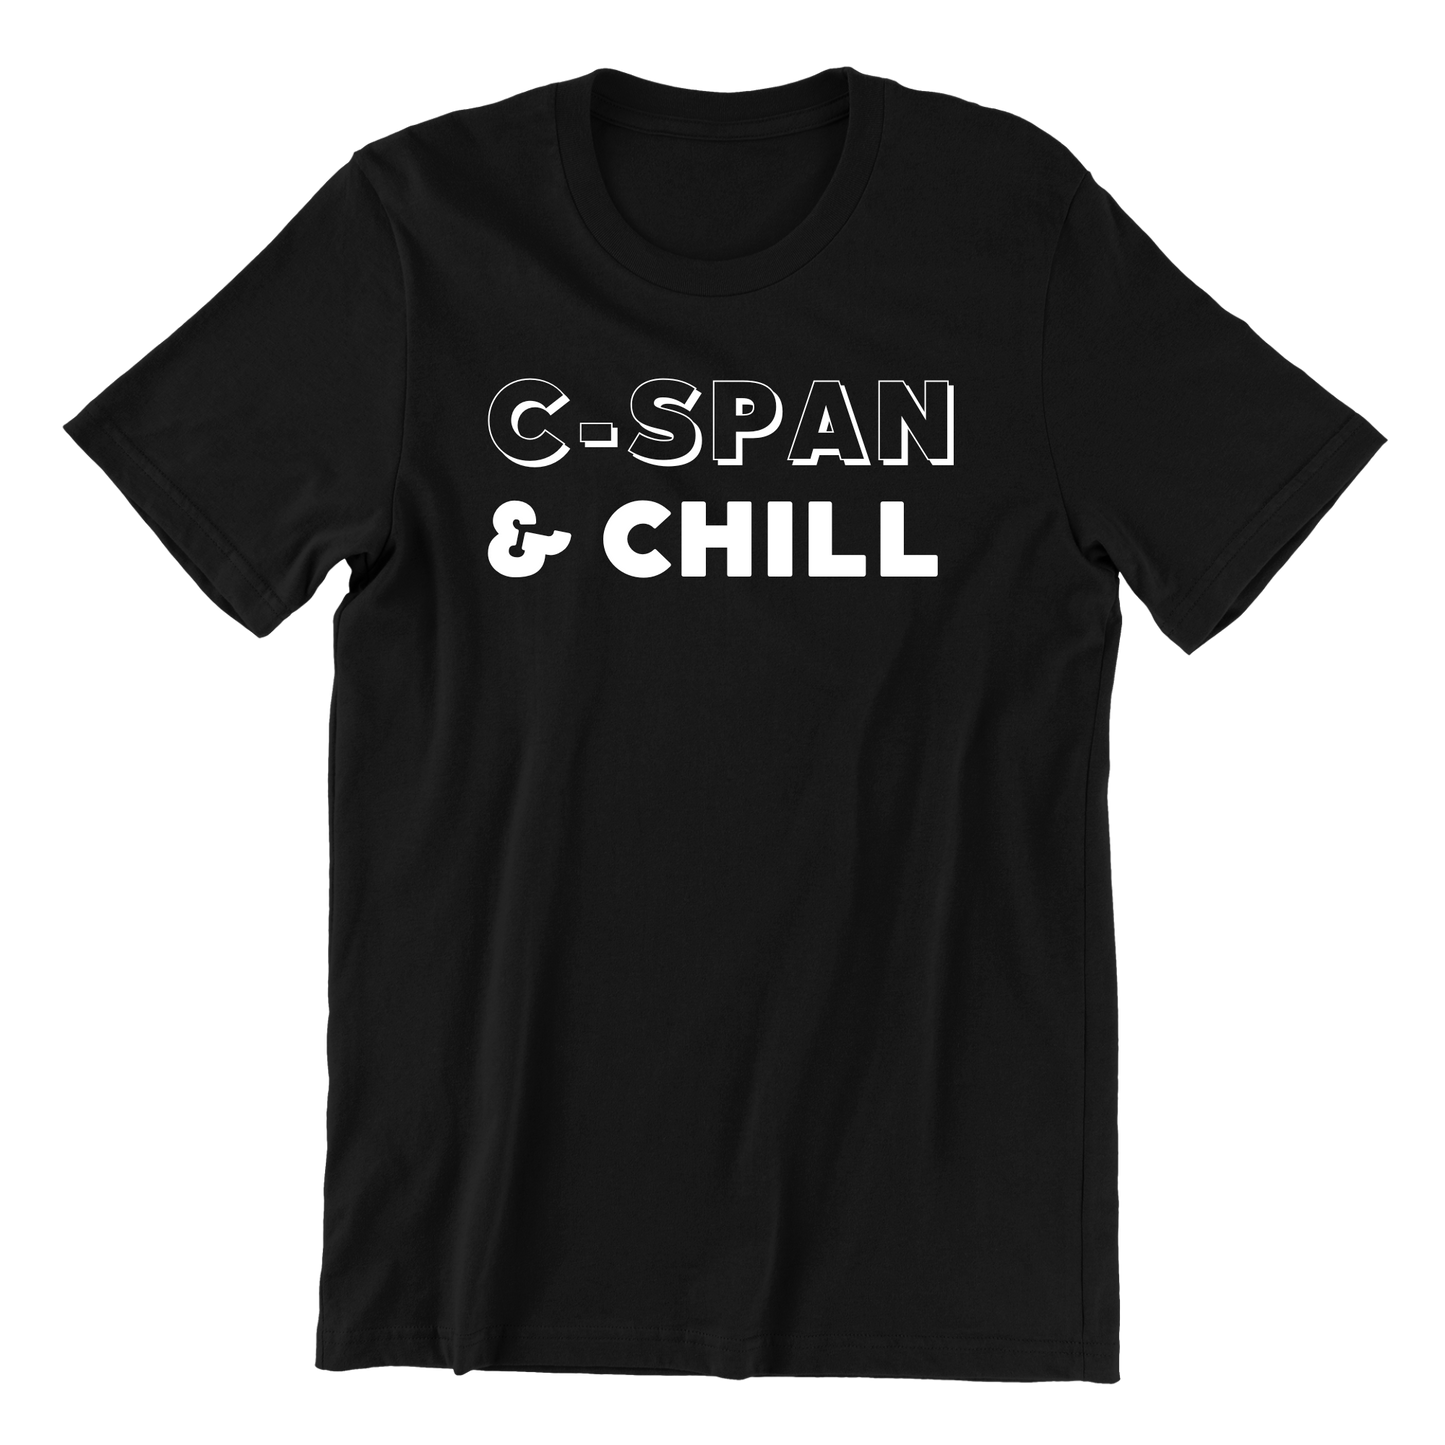 C-span & Chill Tee